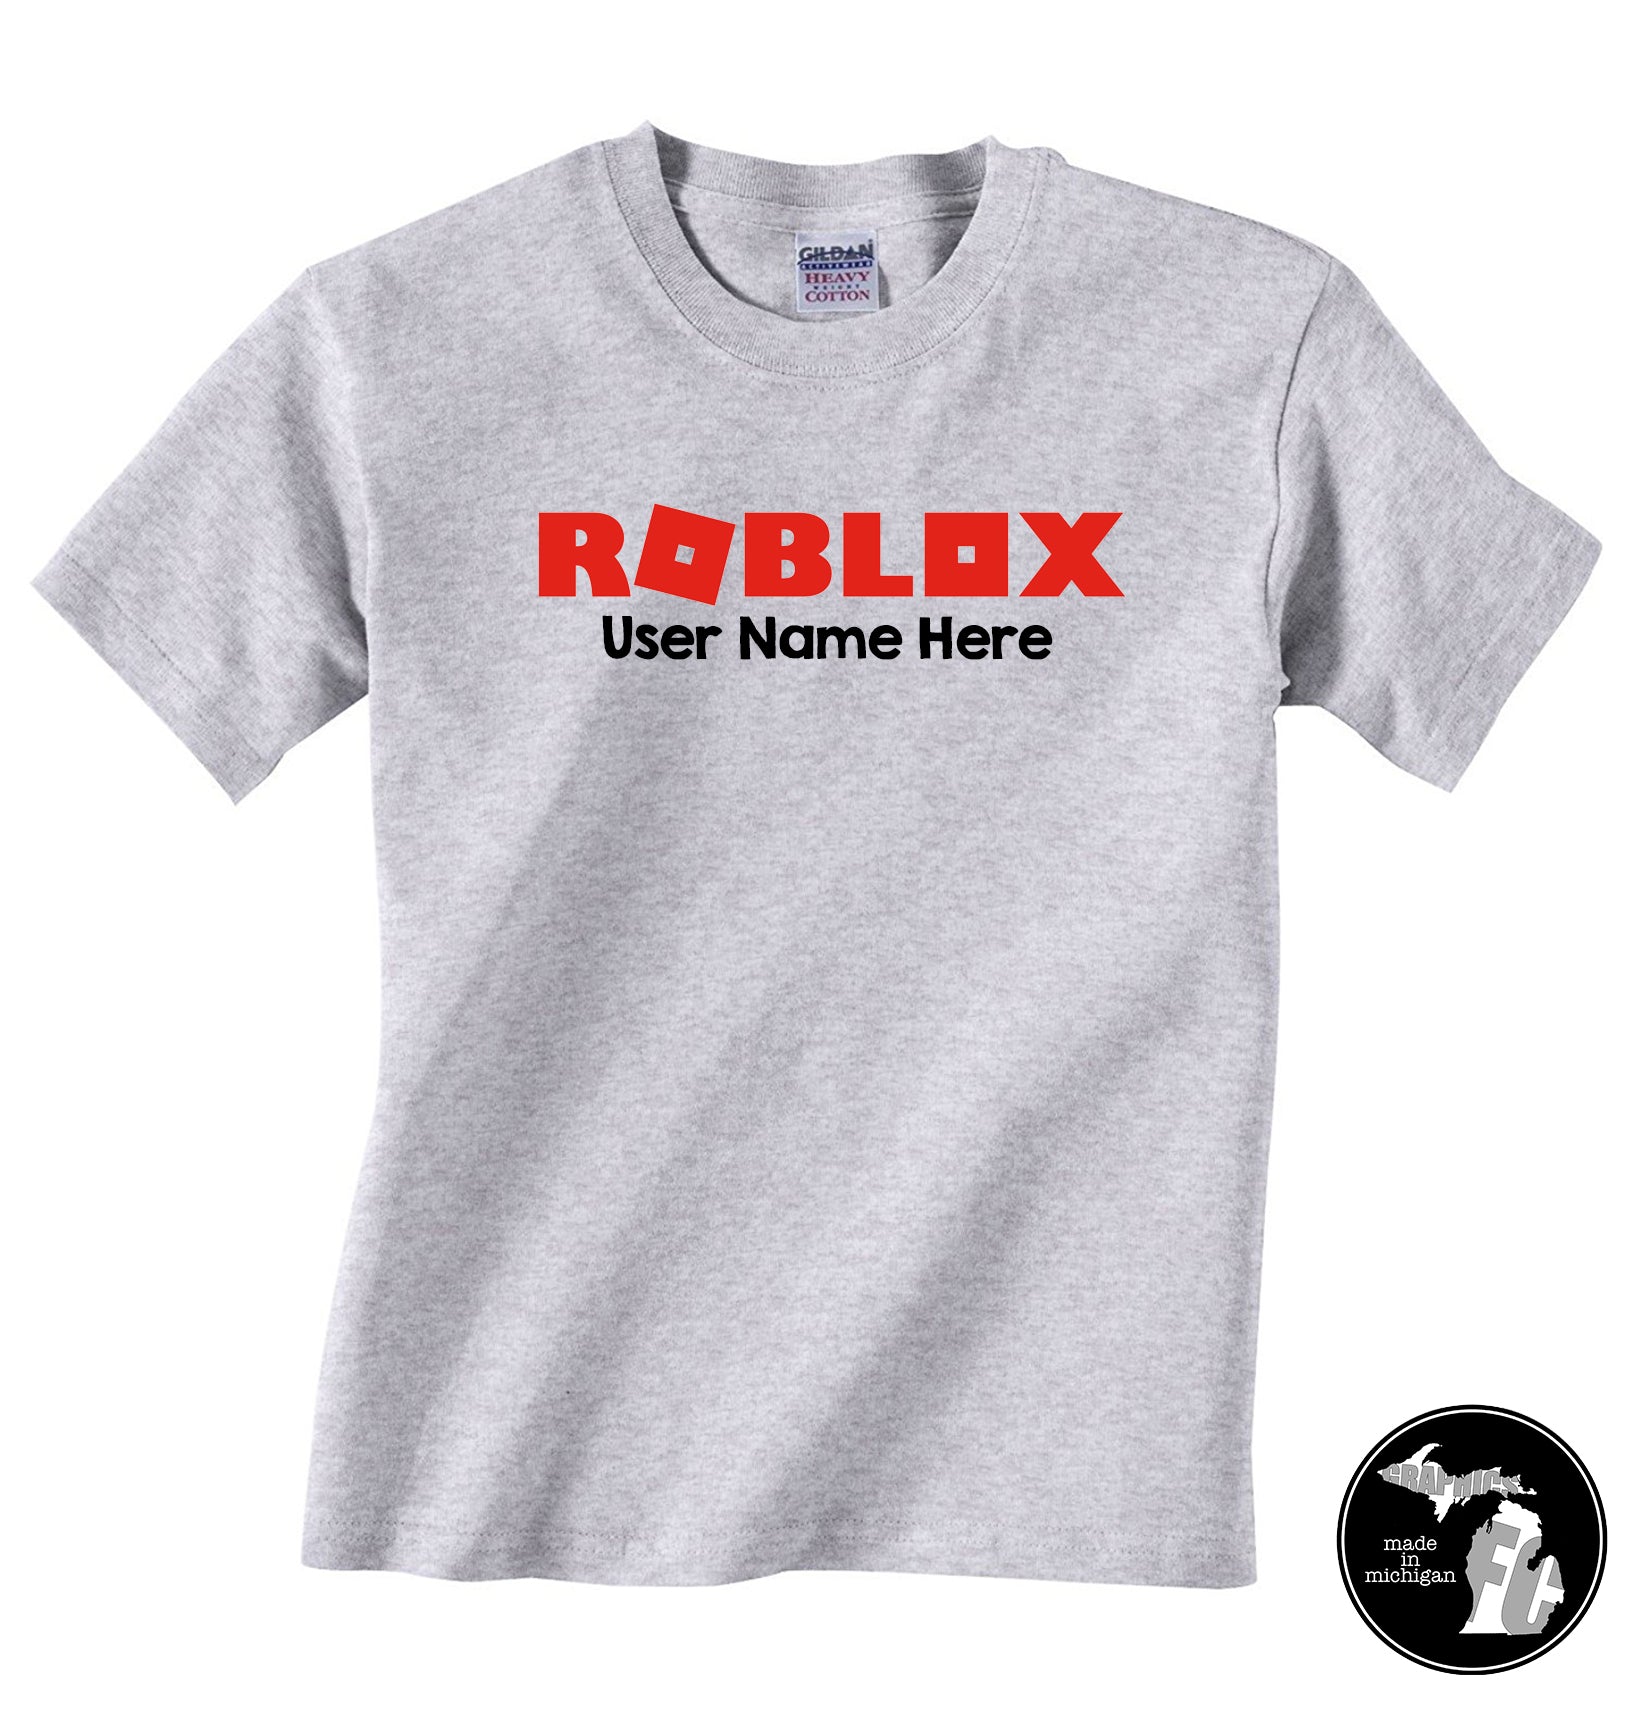 Roblox T Shirt With Personal User Name Kids Shirt Child Adults Furniture City Graphics - roblox windows t shirt free